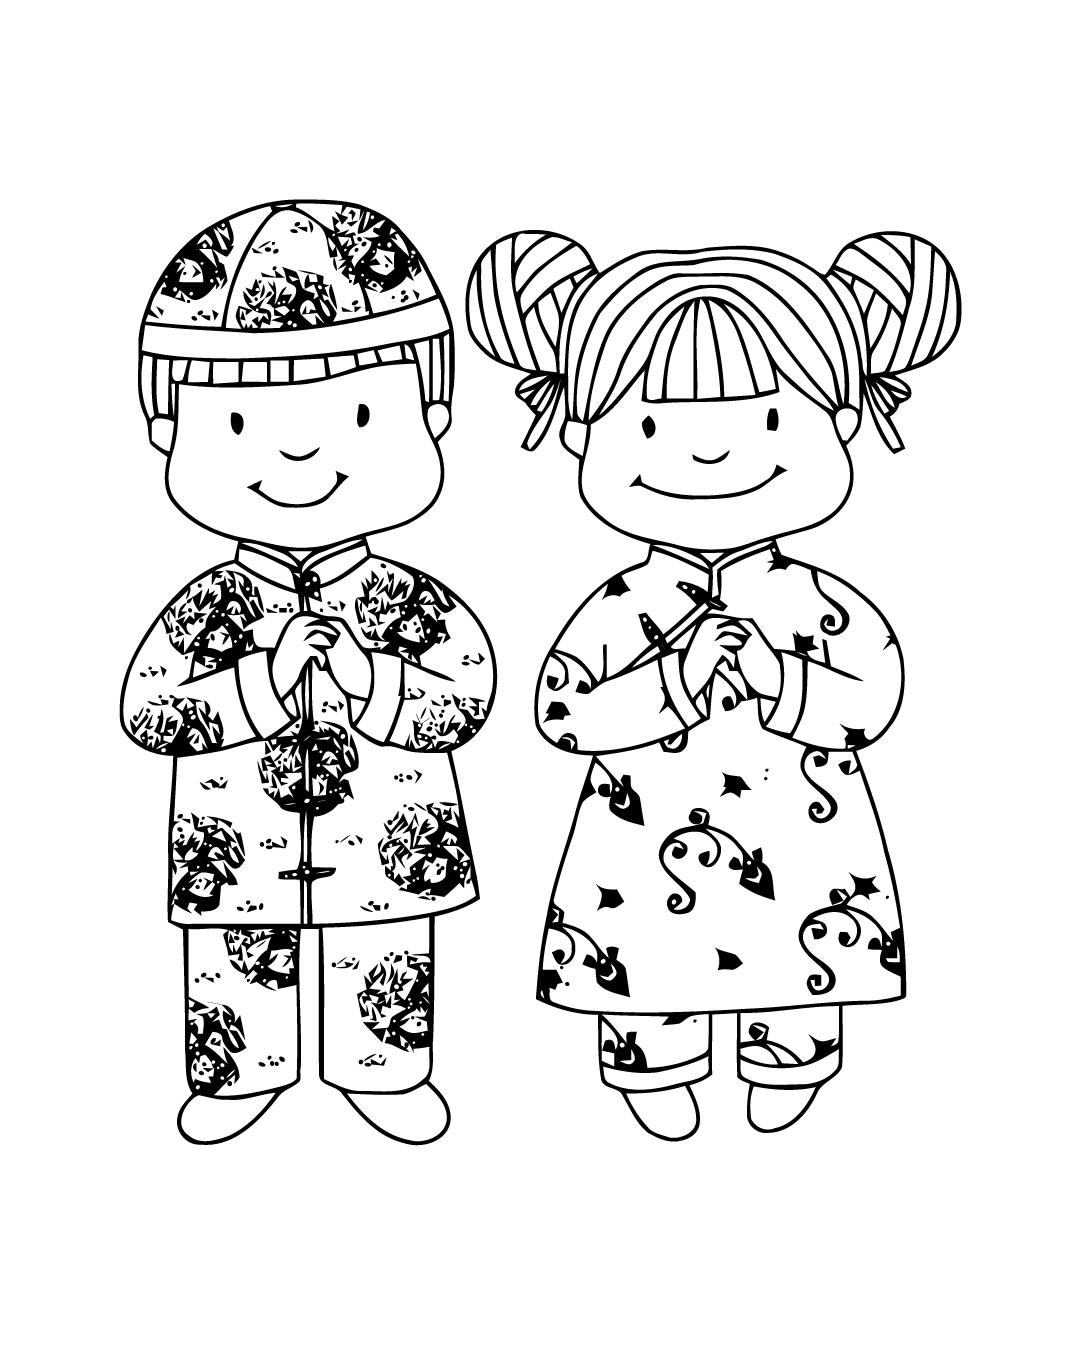 2 small children ready to celebrate Chinese New Year